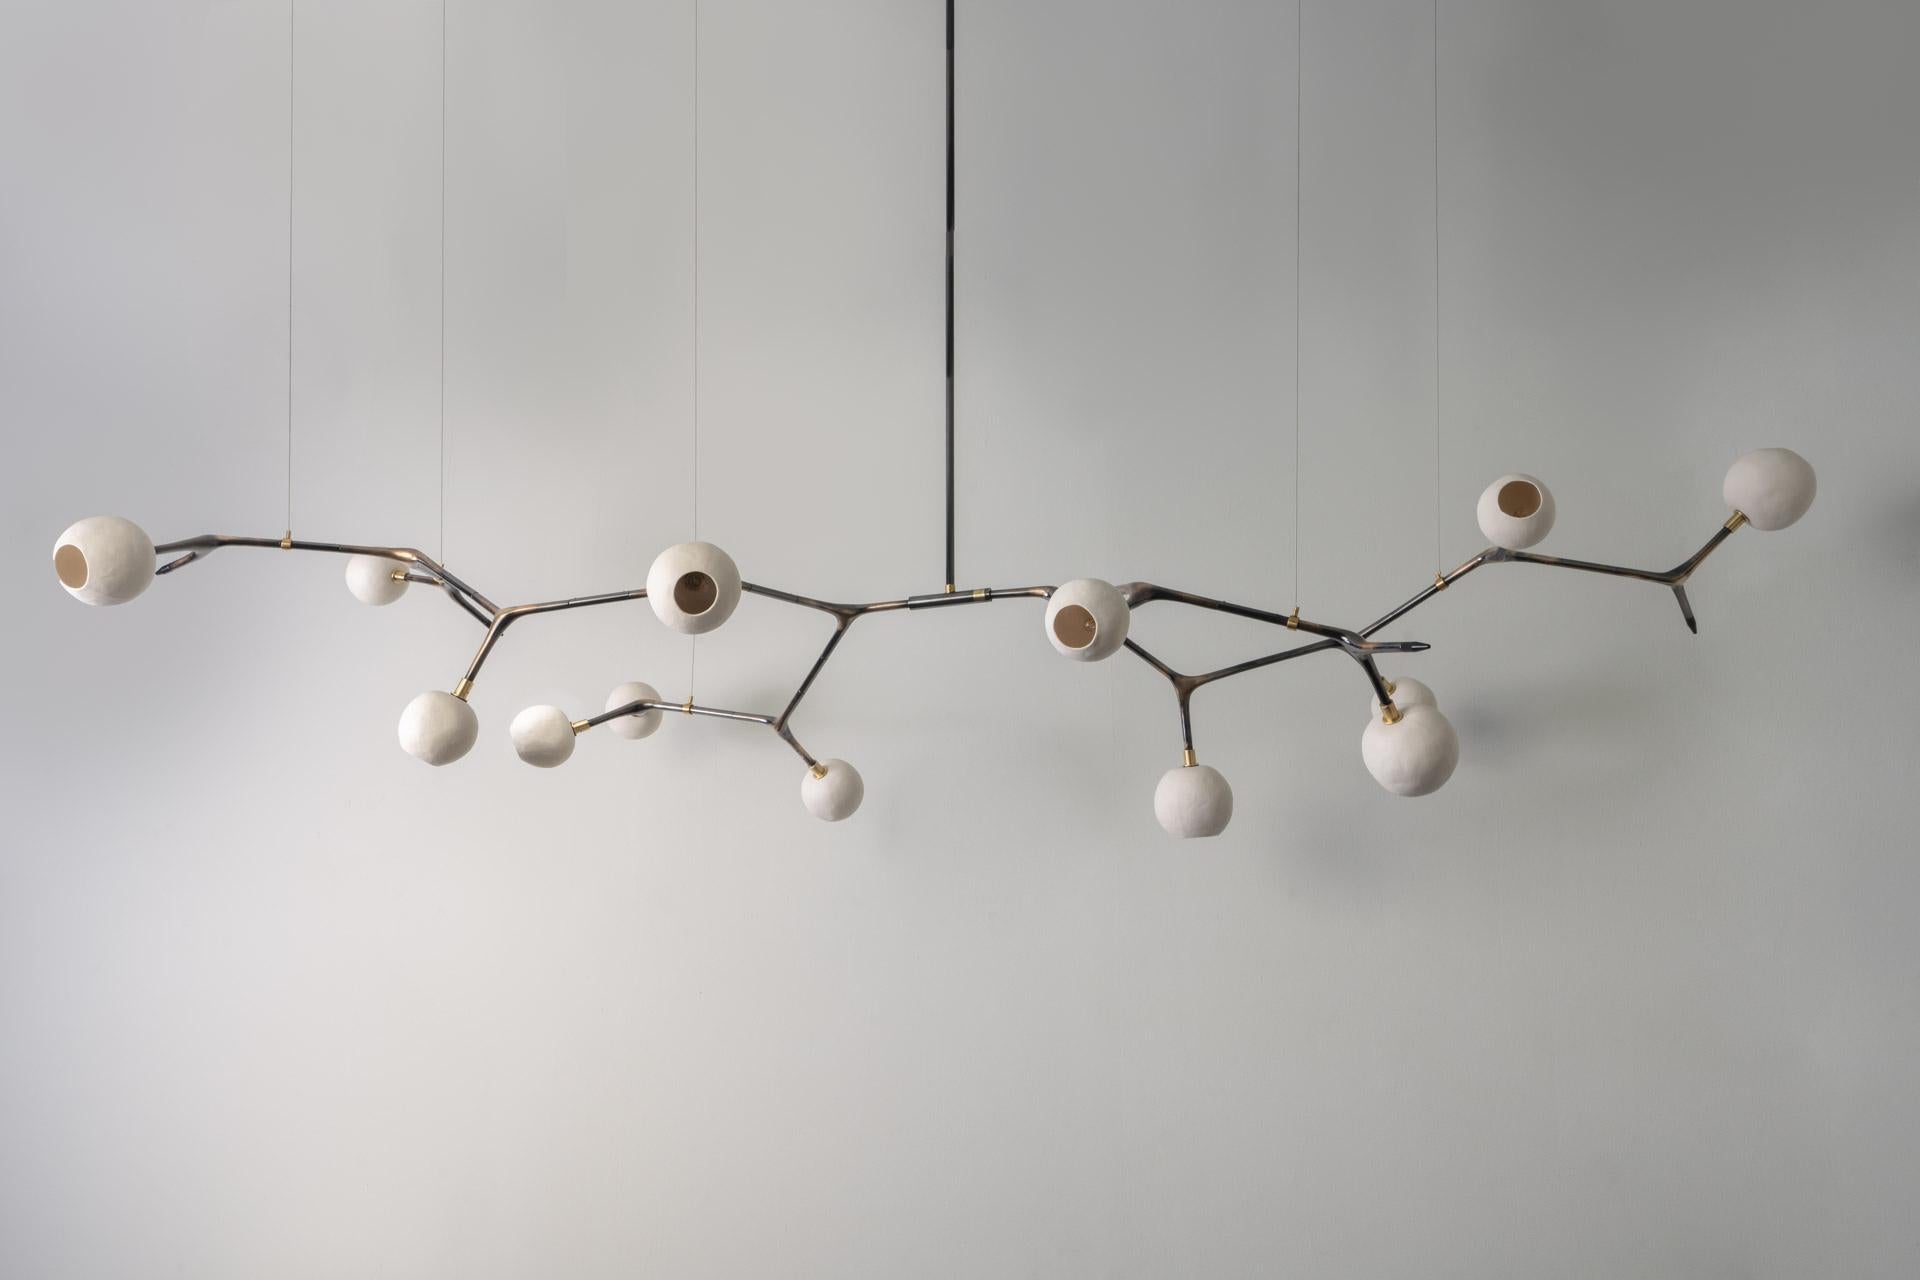 MANTIS 13 pendant light was designed for the Mol collection by Mexican artist Isabel Moncada.

Just like the insect it shares its name with, this piece is elongated with fluid lines and soft curves. The globes emulate water droplets suspended on its